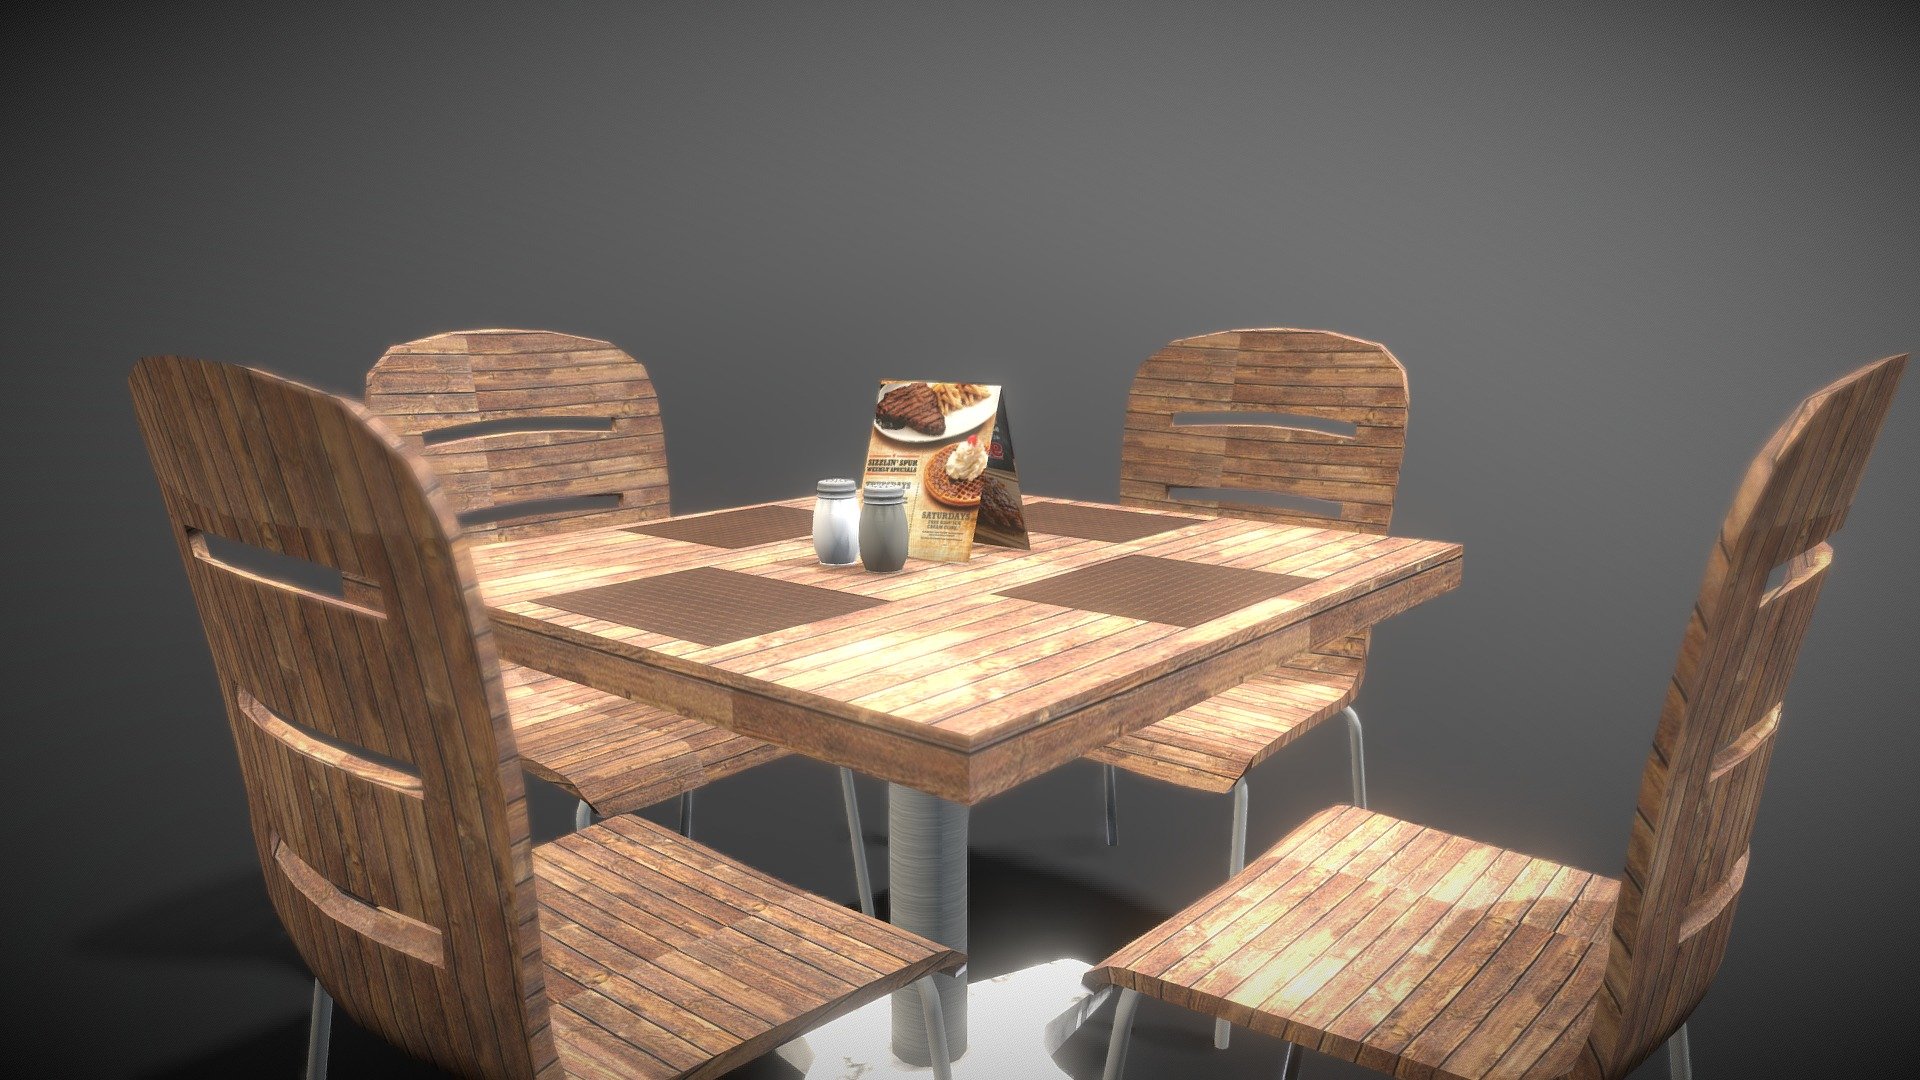 Simple Table scene made in 3ds Max.
Model has textures setup for easy customization - Terrace Shop - Table - Download Free 3D model by OmegaRedZA 3d model